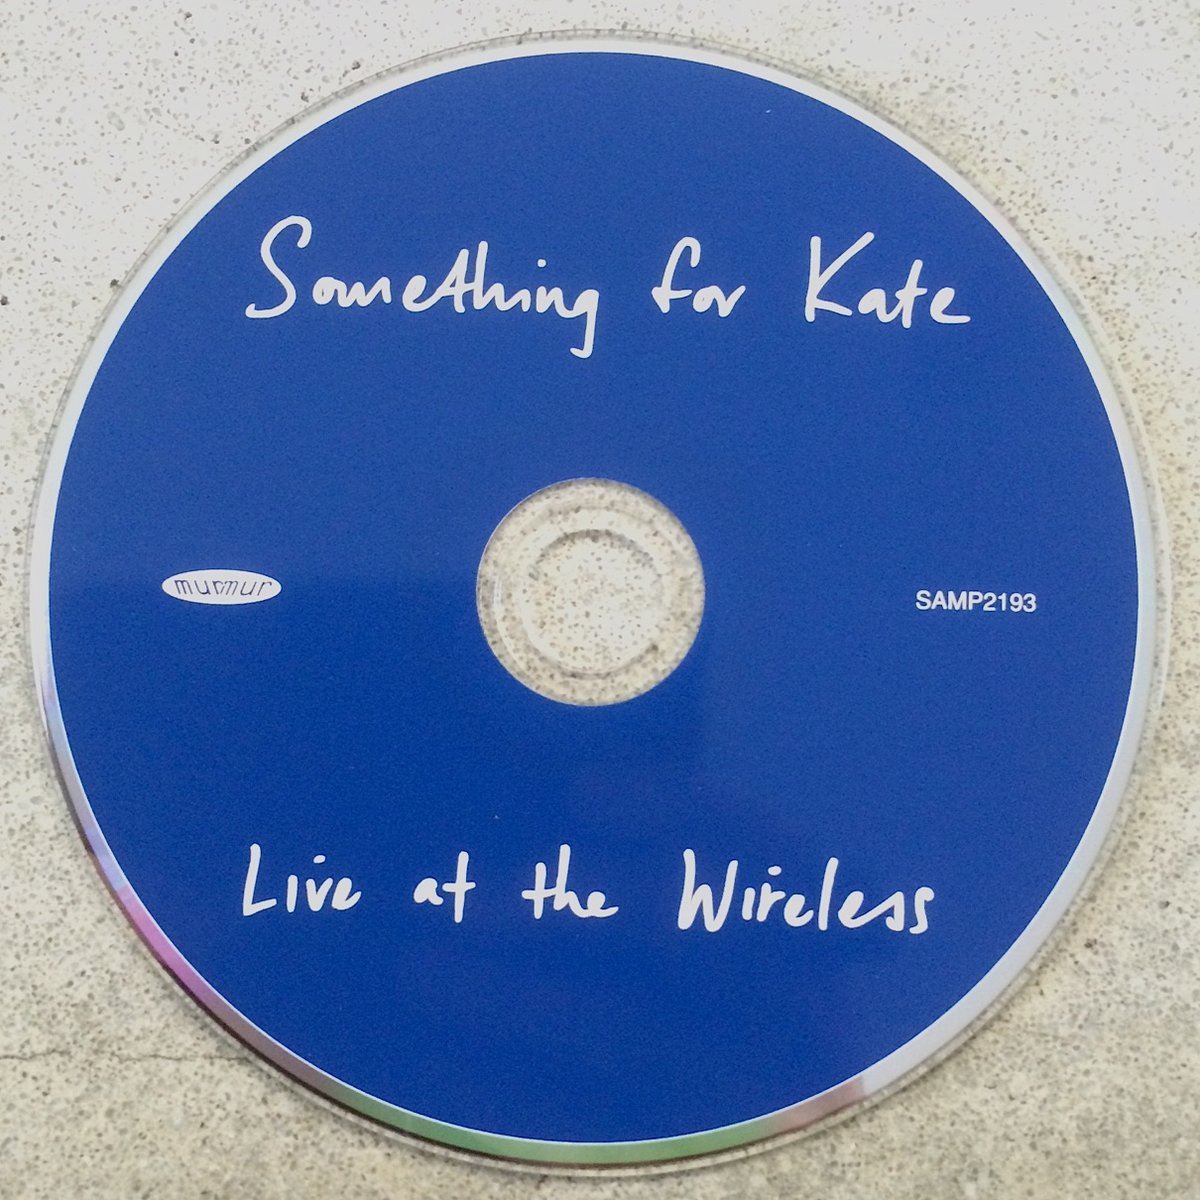 Image of Something for Kate - Live at the Wireless promotional CD 1999. 